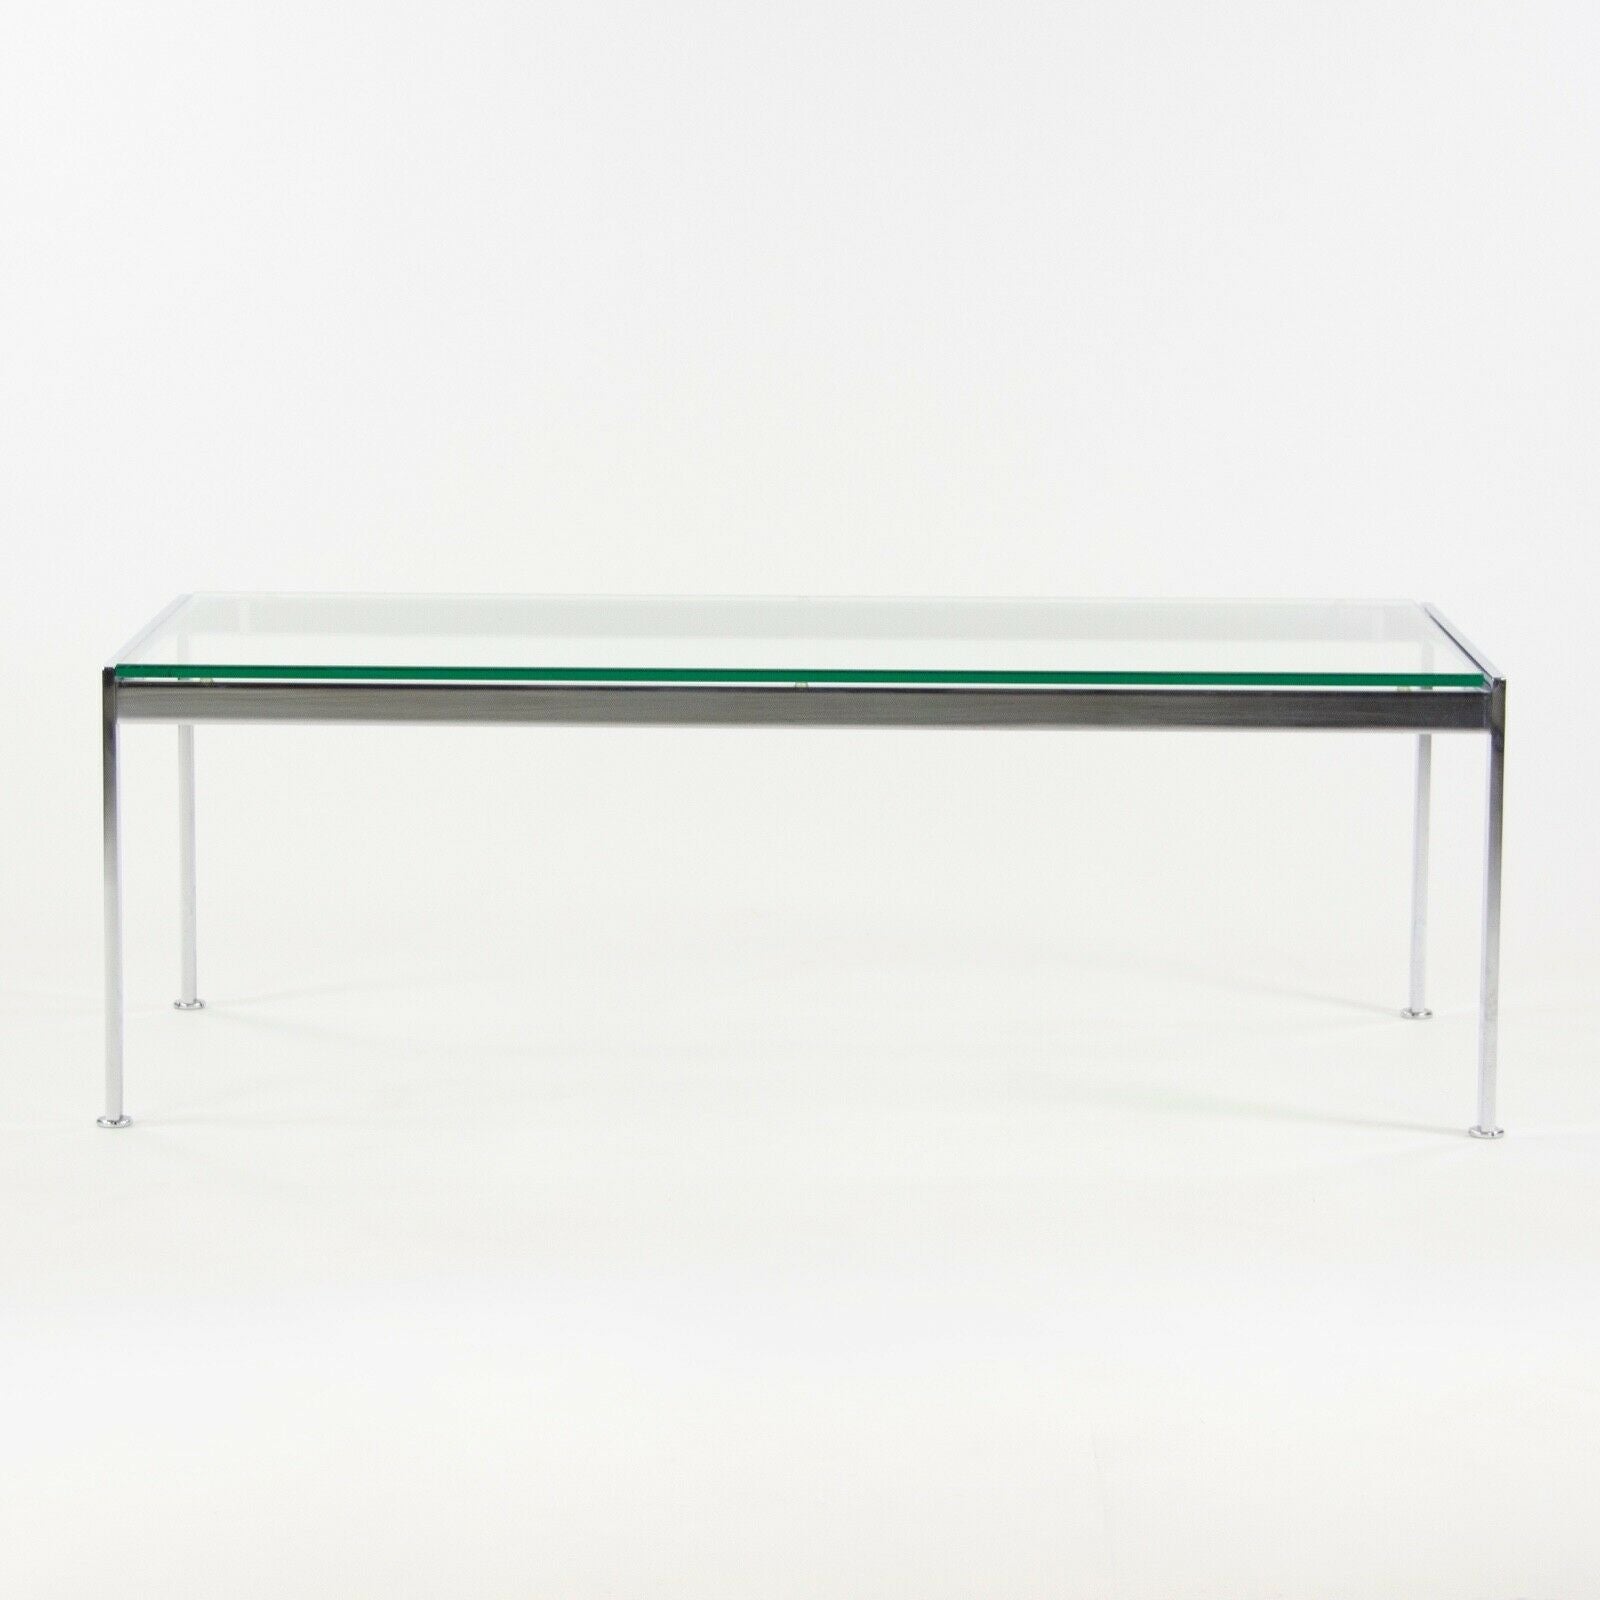 SOLD Geiger Metal Series Coffee Table, Chromed Steel and Glass Top 48" x 24"